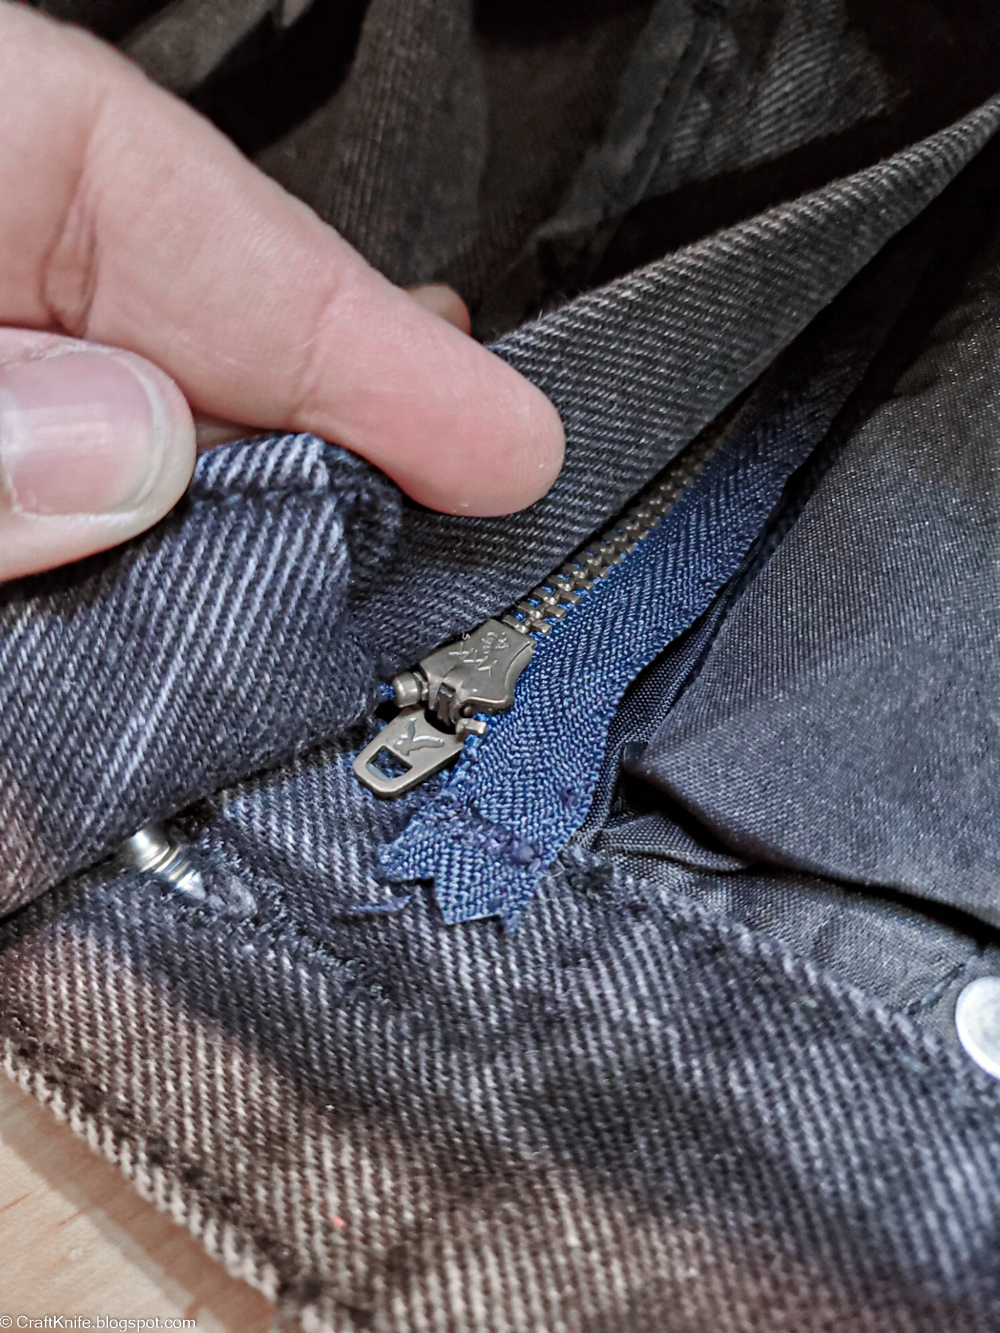 How to Replace the Zipper in a Pair of Pants